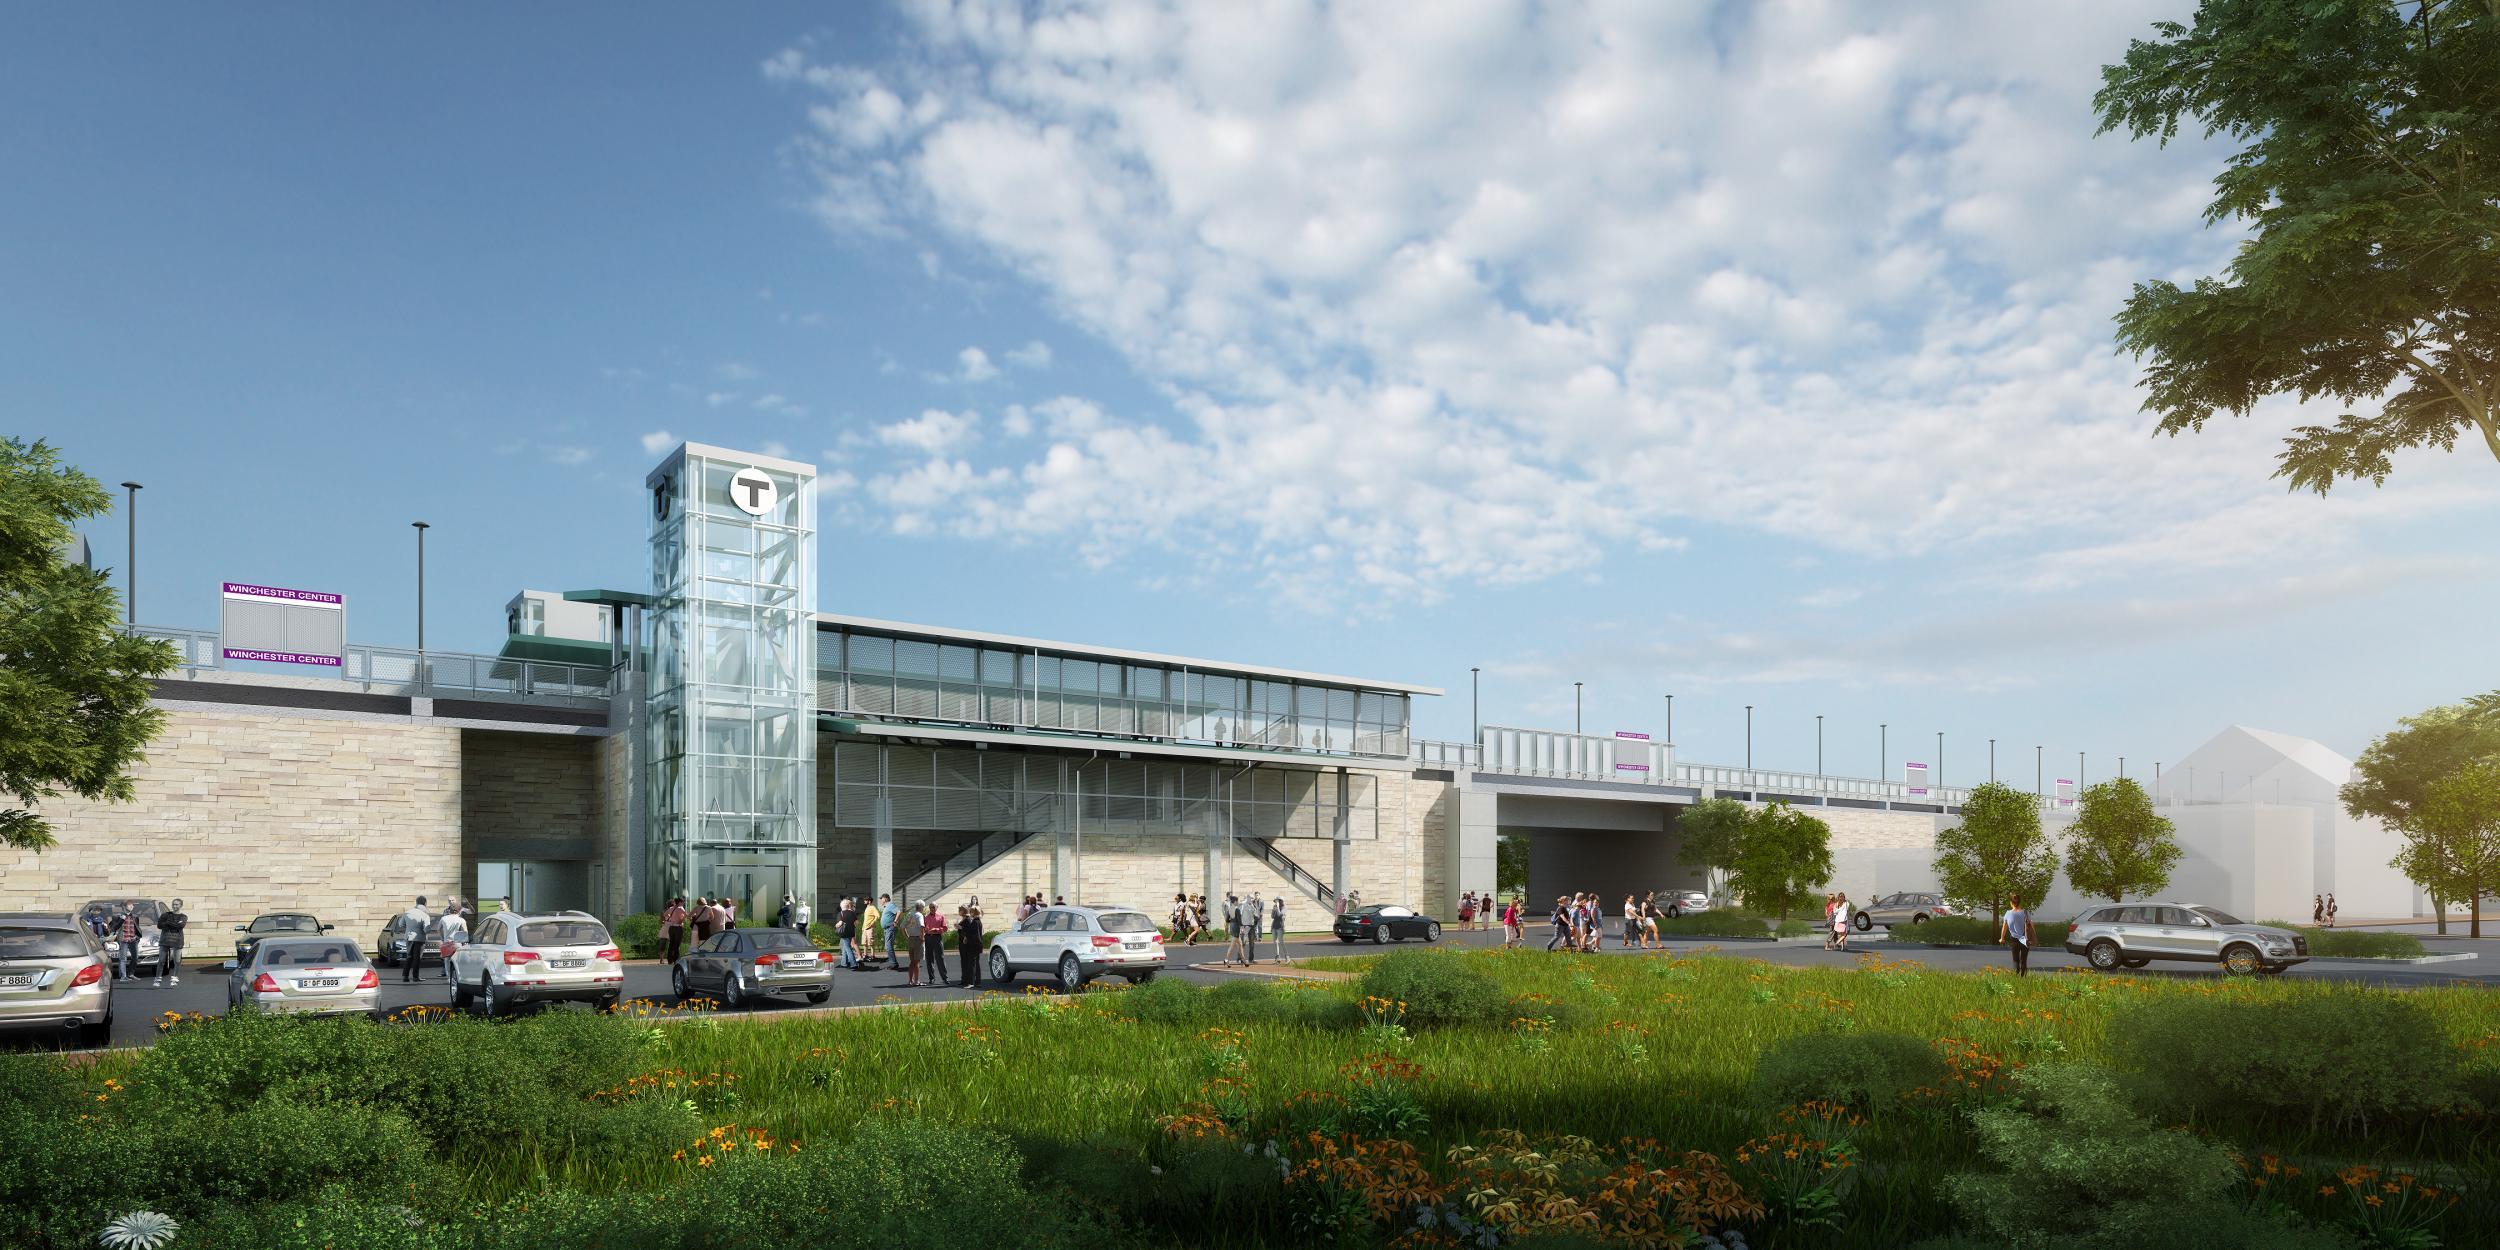 A rendering shows what Winchester Station will look like after accessibility improvements, with a new elevator, station signage, people in the parking lot, as viewed from the from the Aberjona parking lot.